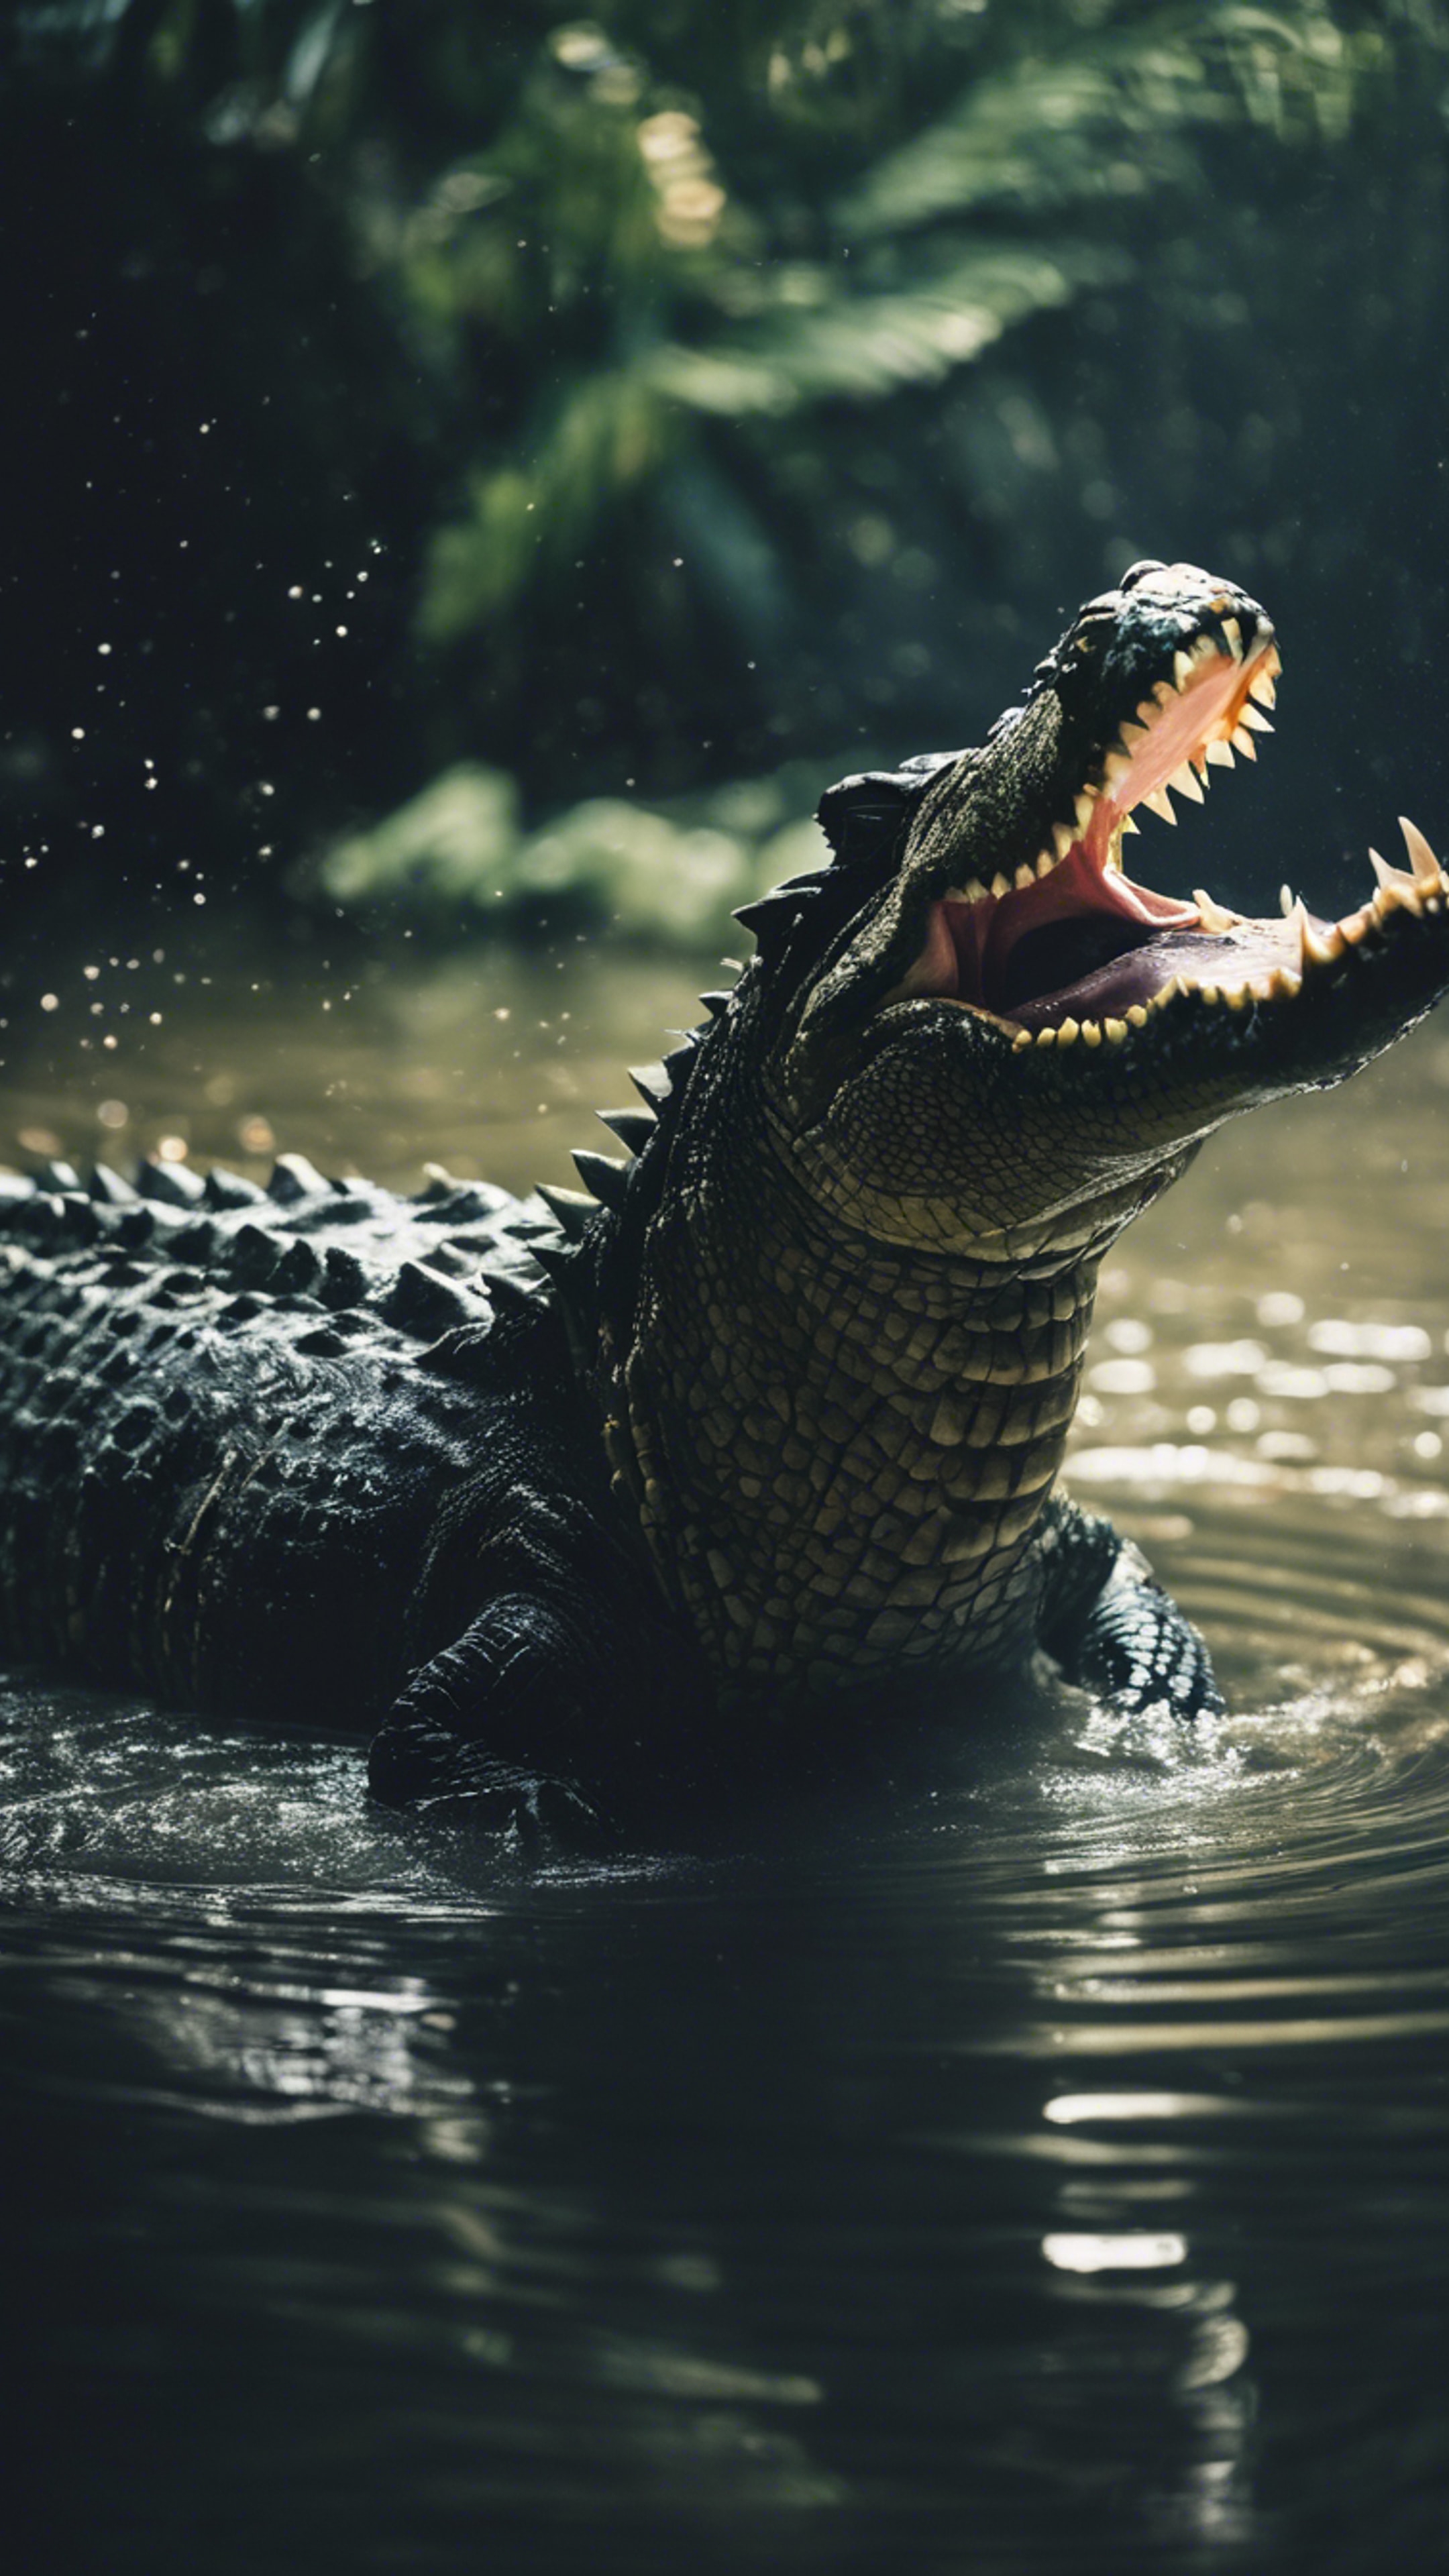 Two crocodiles engaging in a territorial battle in the middle of a dark lagoon. Tapet[ccc66b55c2b3408d8928]